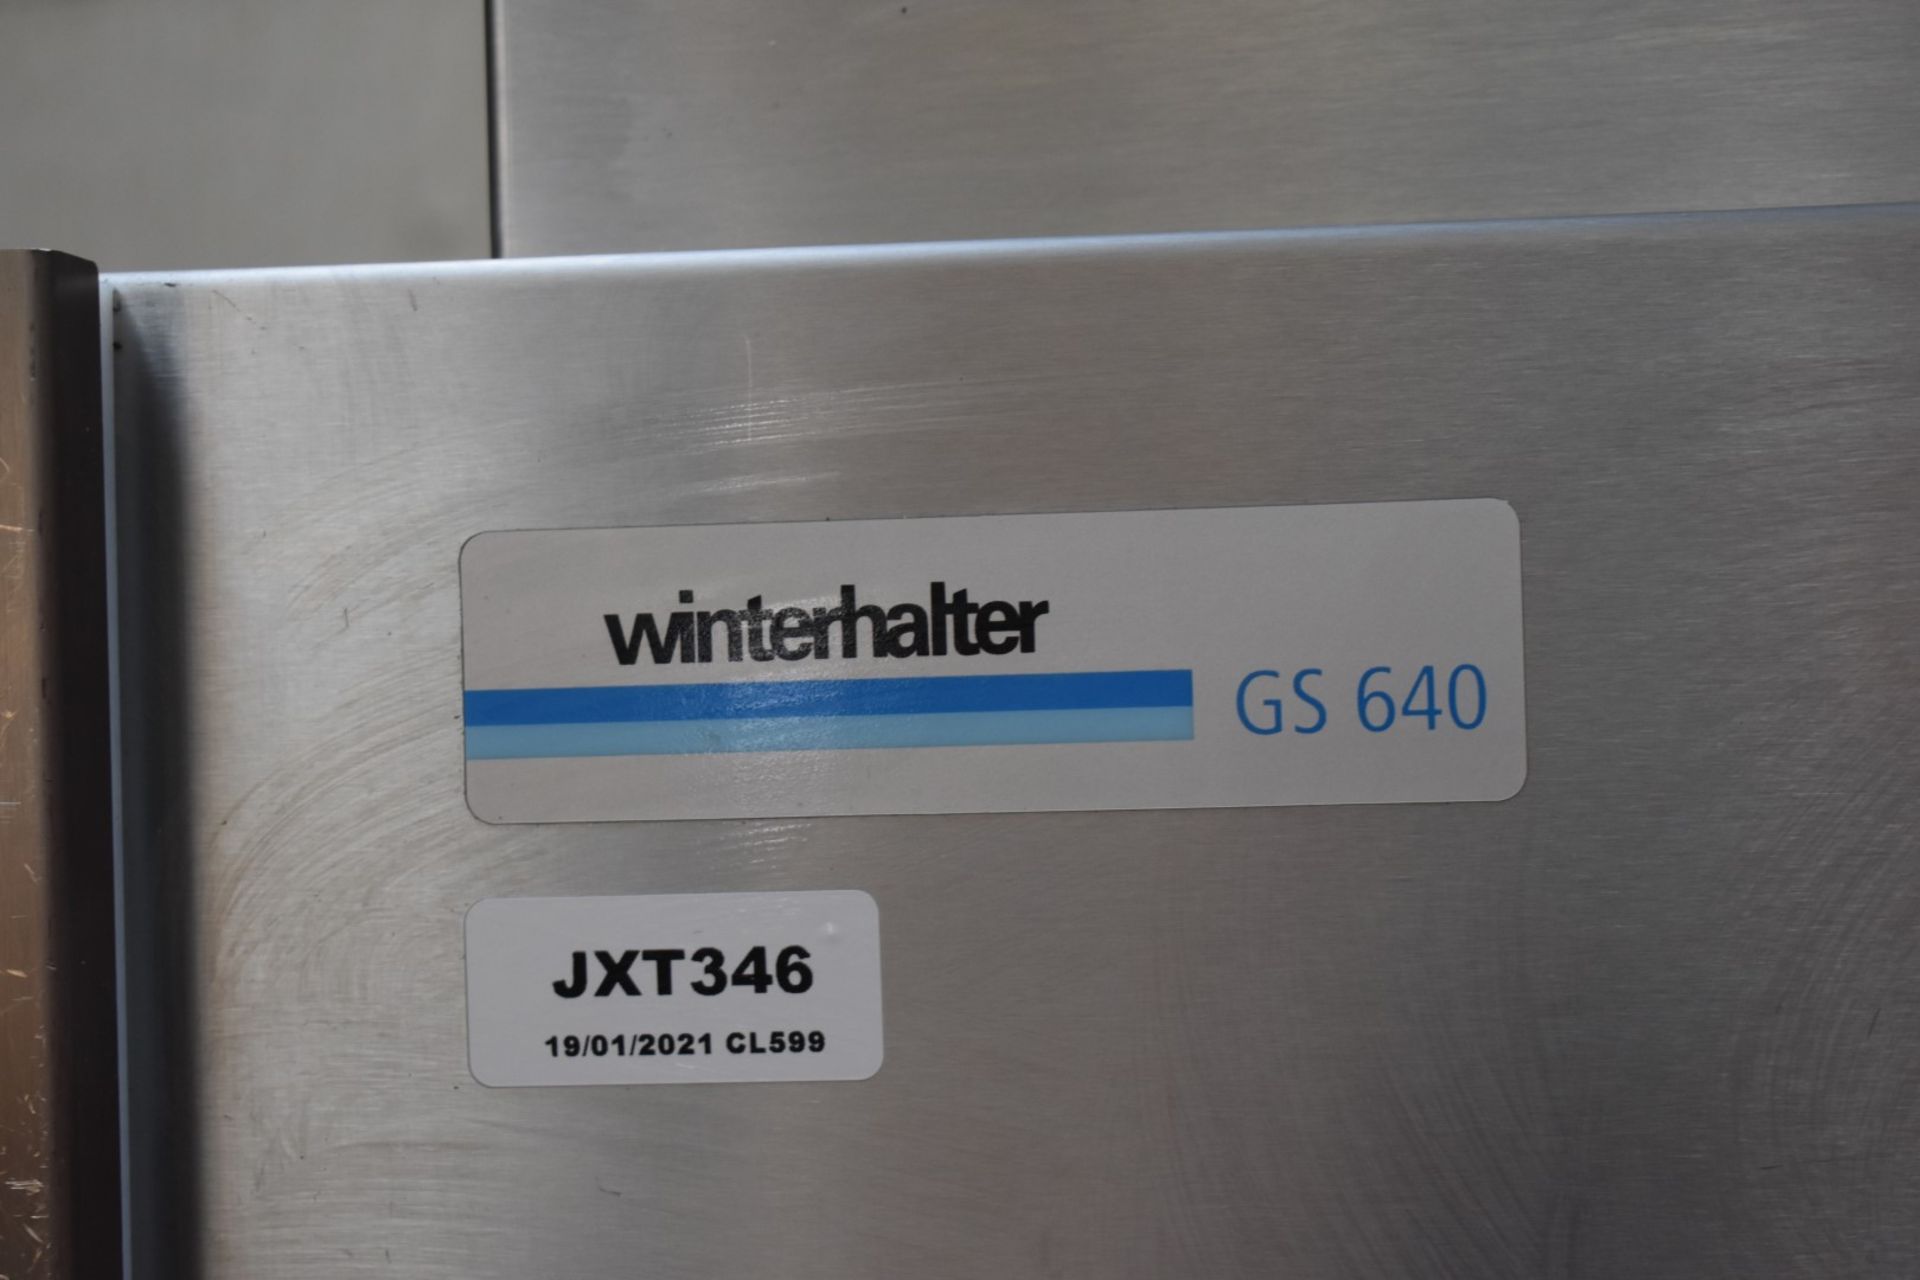 1 x Winterhalter GS640 Utensil Pot Washer - 3 Phase - Original RRP Approx £13,000 - Image 7 of 11